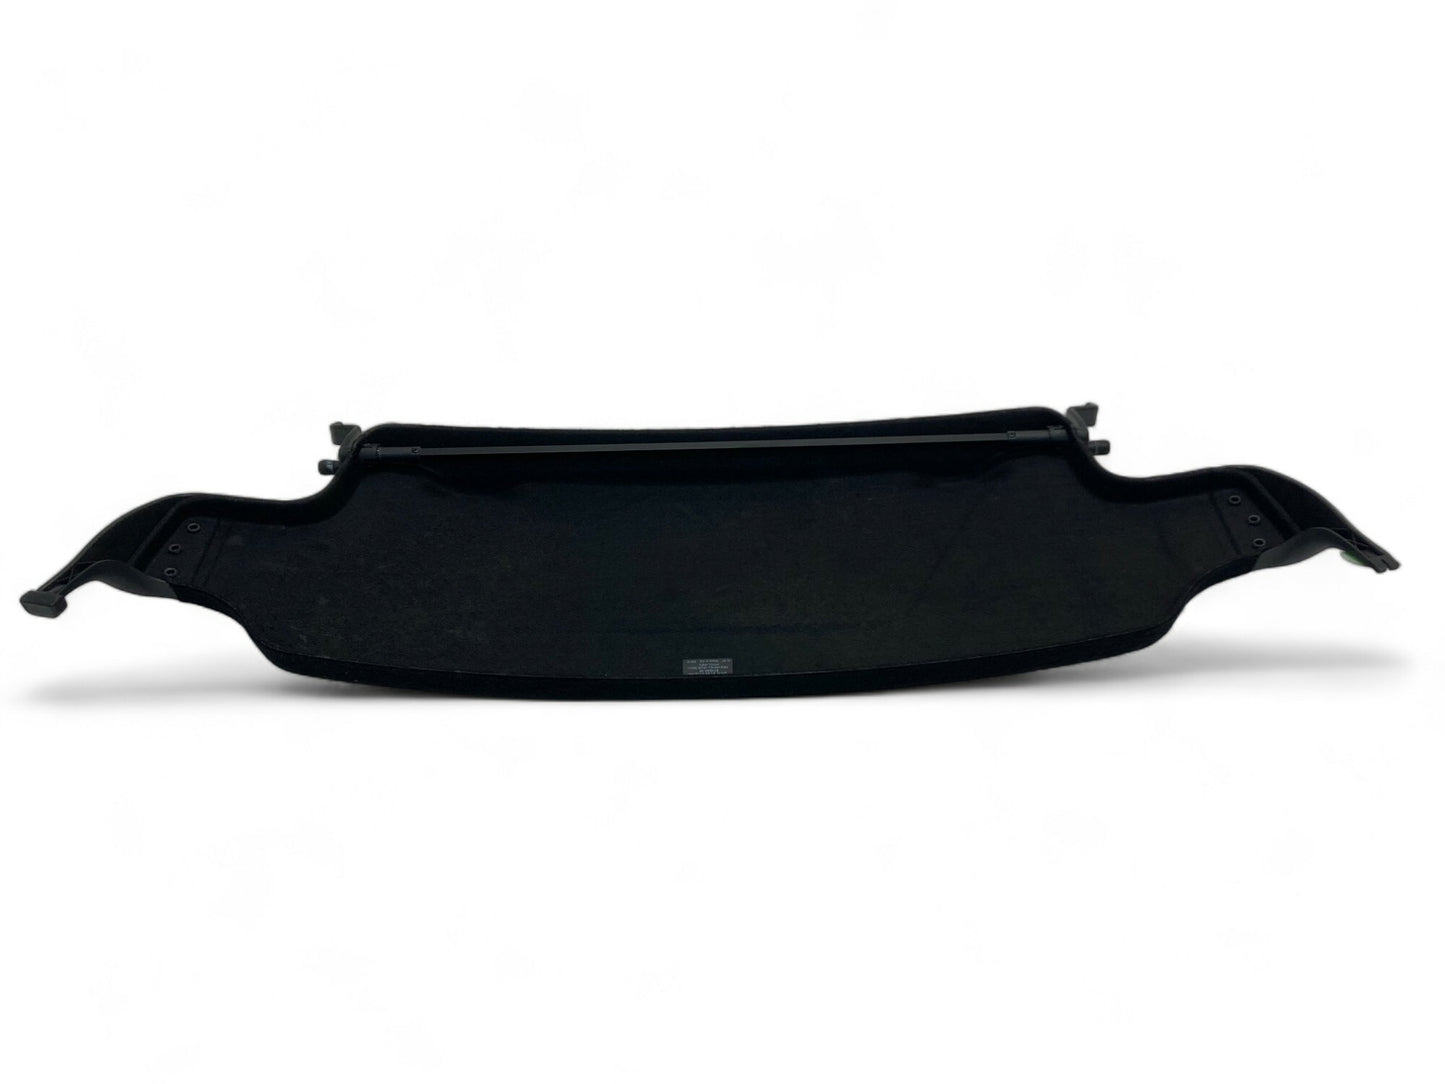 Mini Cooper Convertible Rear Cargo Shelf Cover Missing Mounting Tab 51469132384 09-15 R57 428